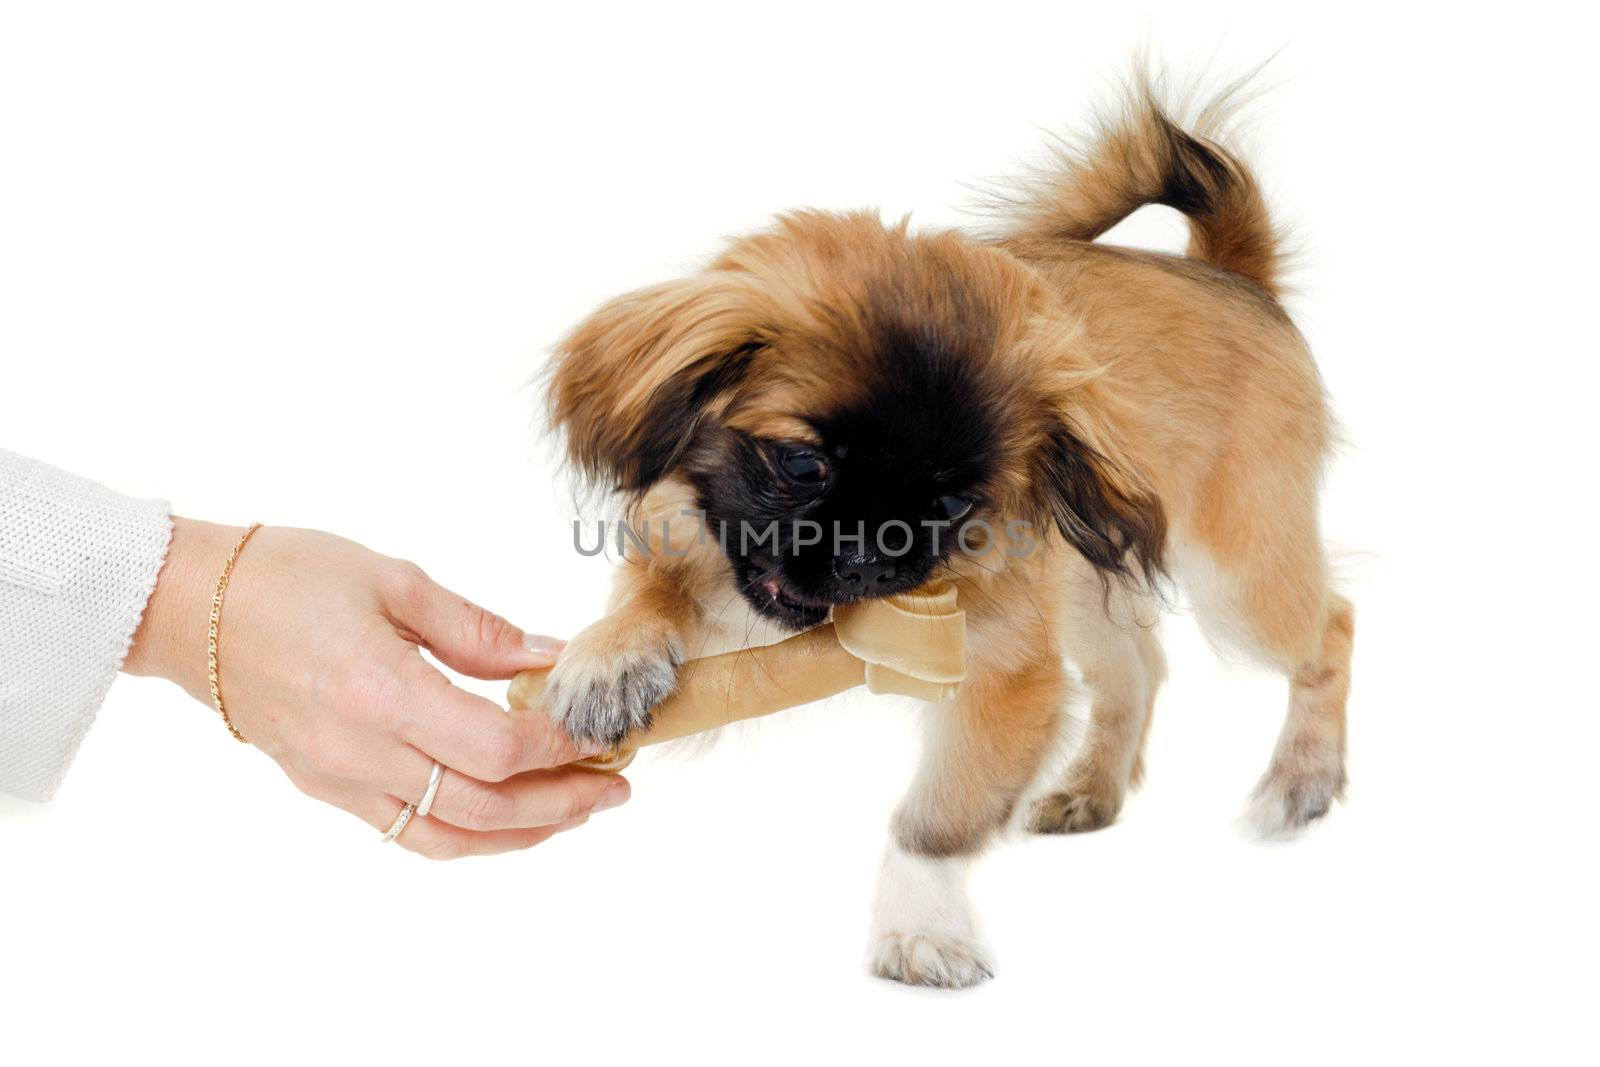 Sweet puppy dog is eating a bone, isolated on a white background.